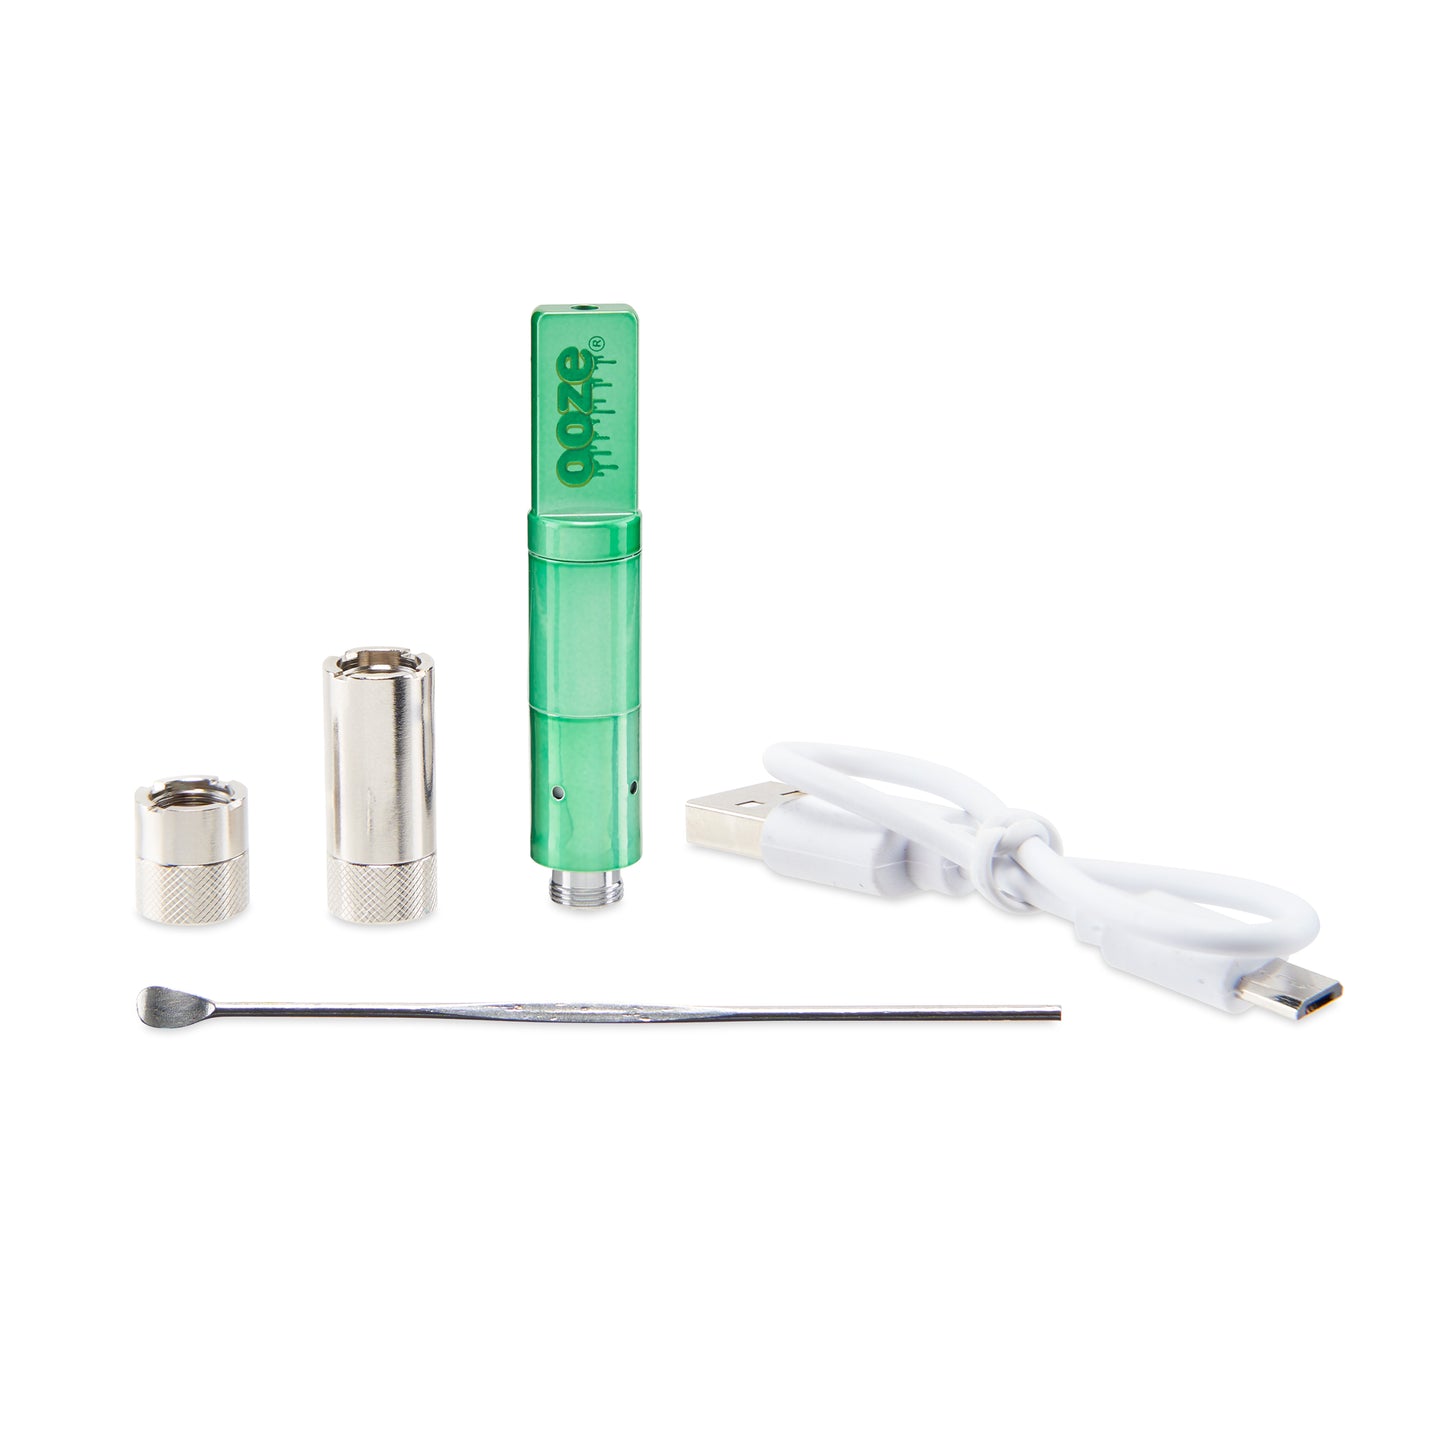 The Mary Jade Ooze Duplex Pro Vaporizer's accessories are grouped together. The 0.5g and 1ml magnetic adapters are next to the green wax atomizer, which is next to the white type-c charger. The dab tool is laying in front.